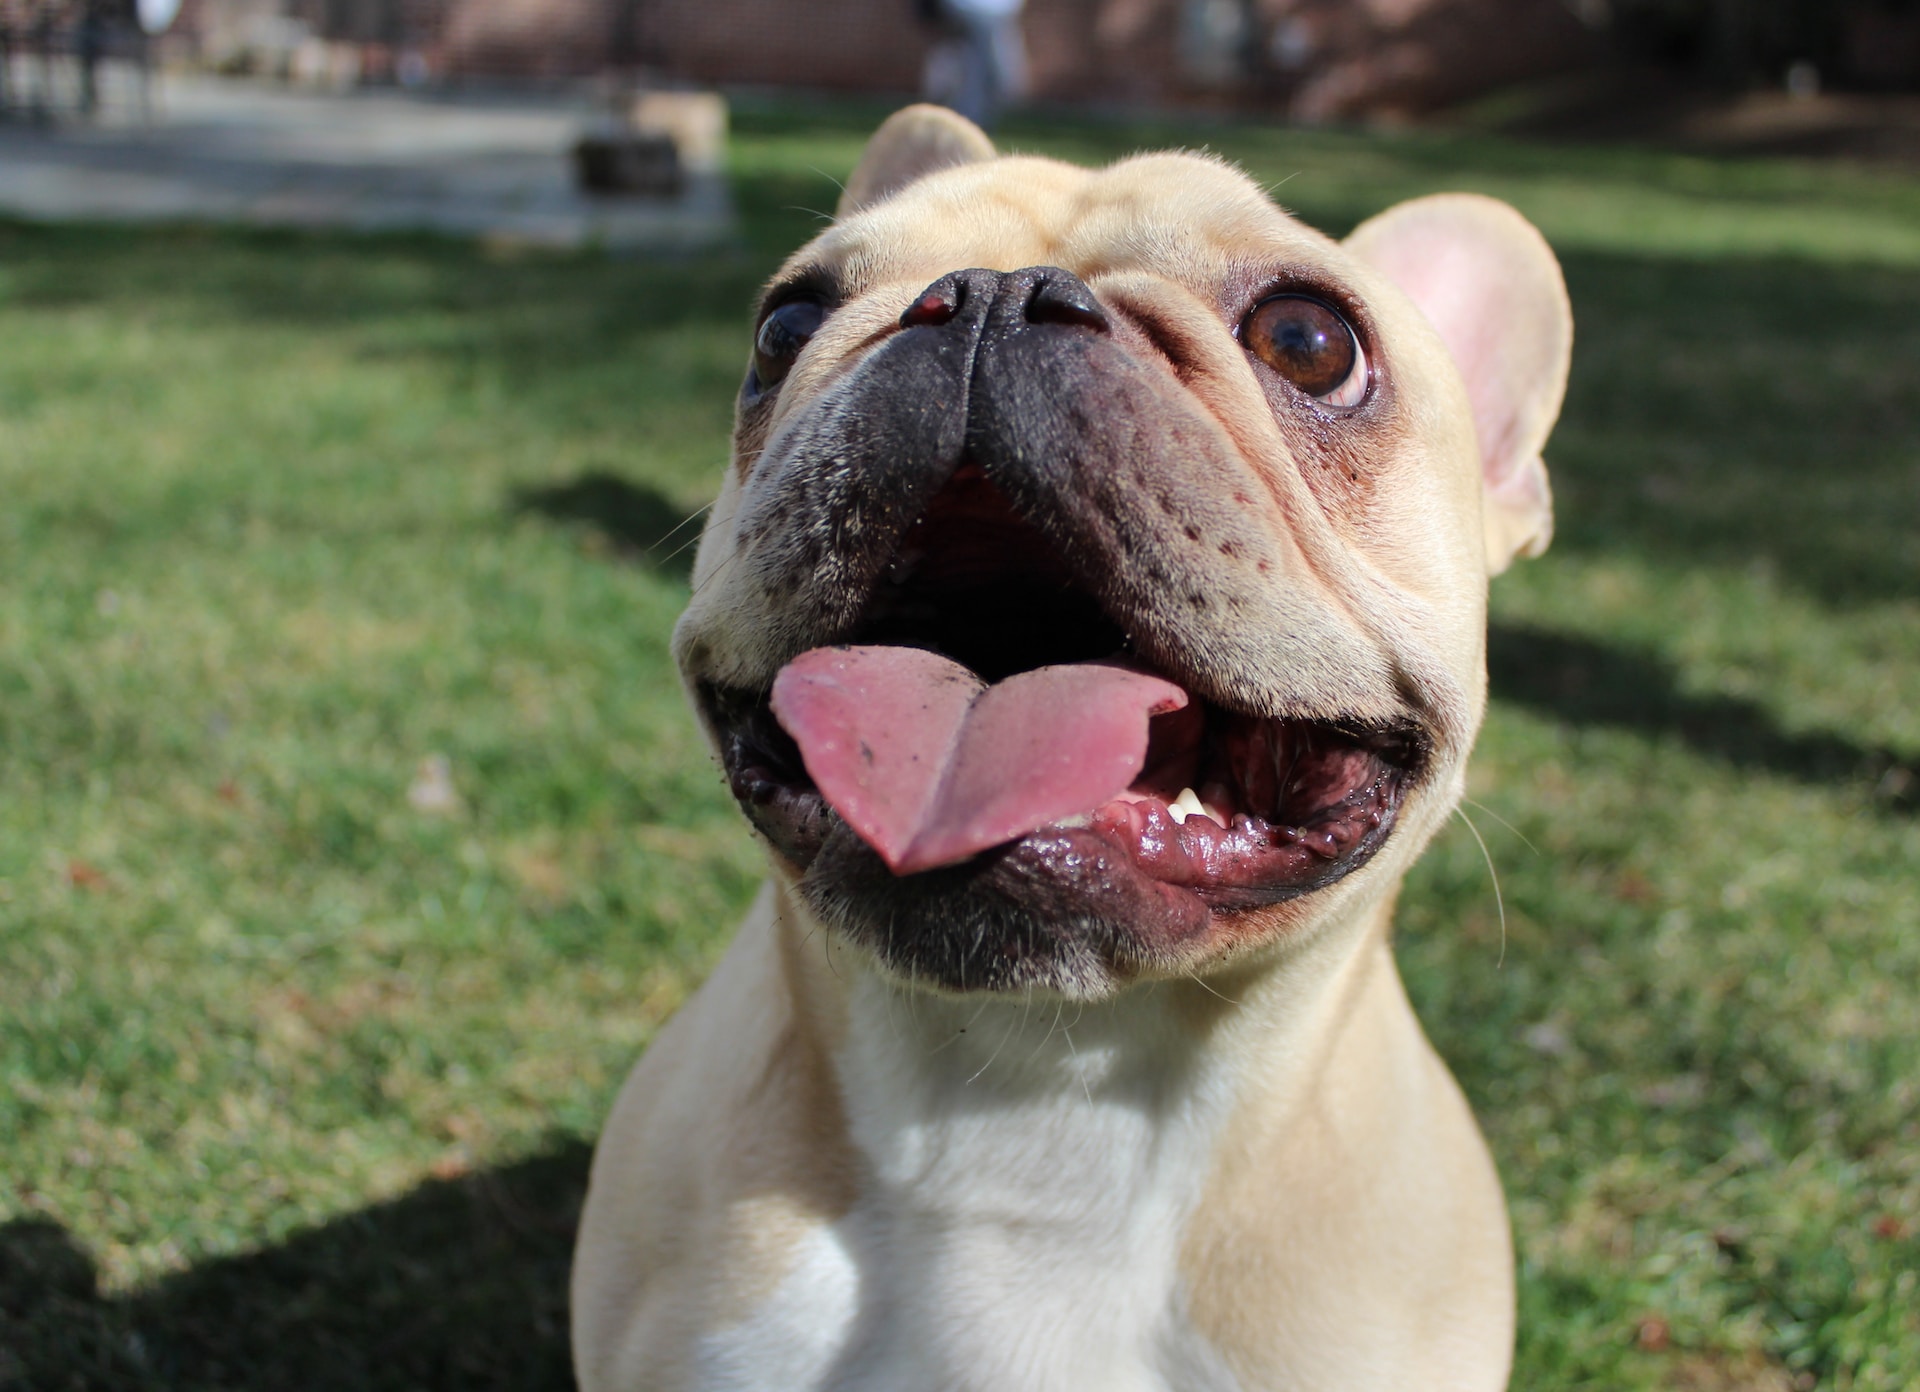 Happy French Bulldog. Image by May Gauthier from Unsplash.